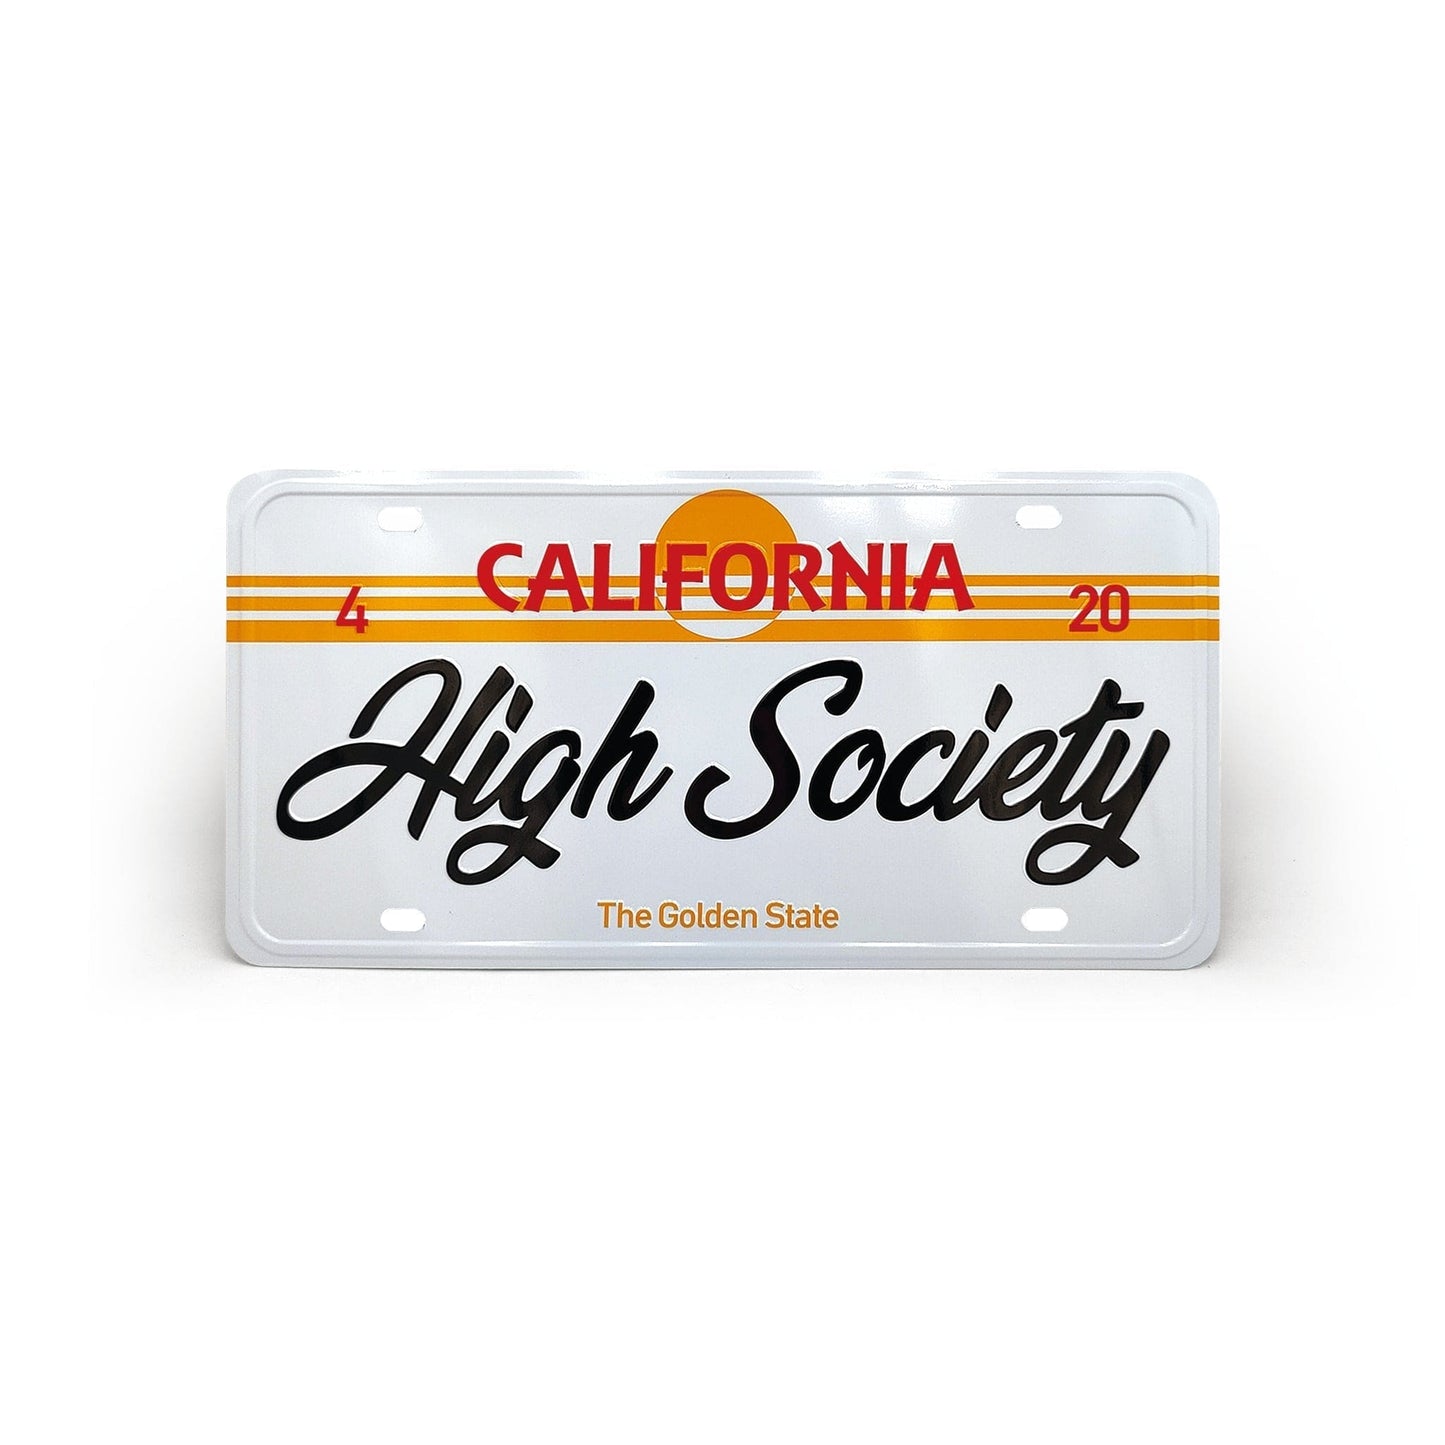 High Society High Society | Limited Edition Collectors Car Plate